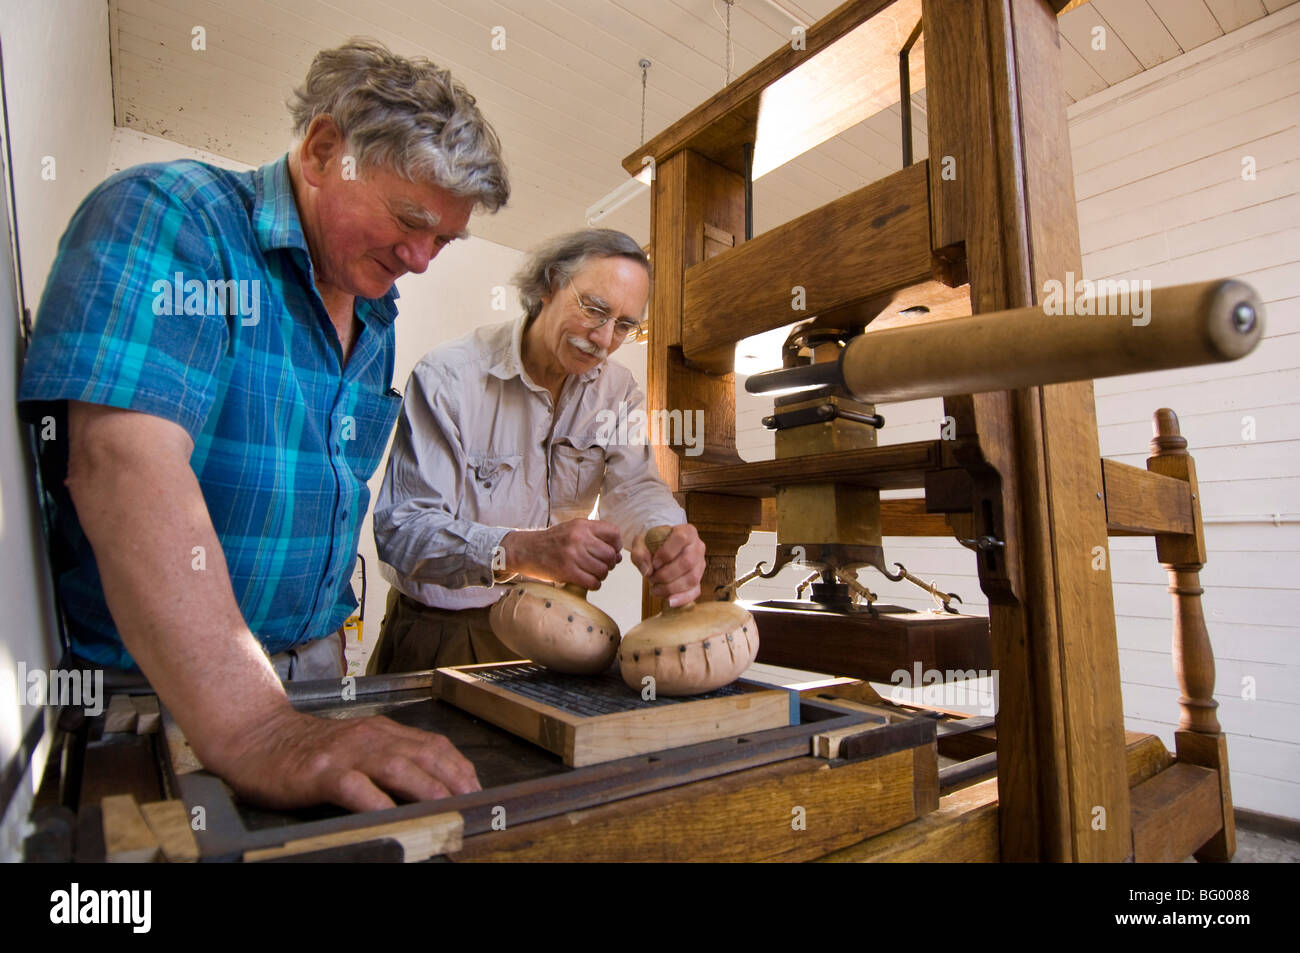 Alan May (left) and Peter Chasseaud (right) set up a working model of an 18th C printing press. Stock Photo